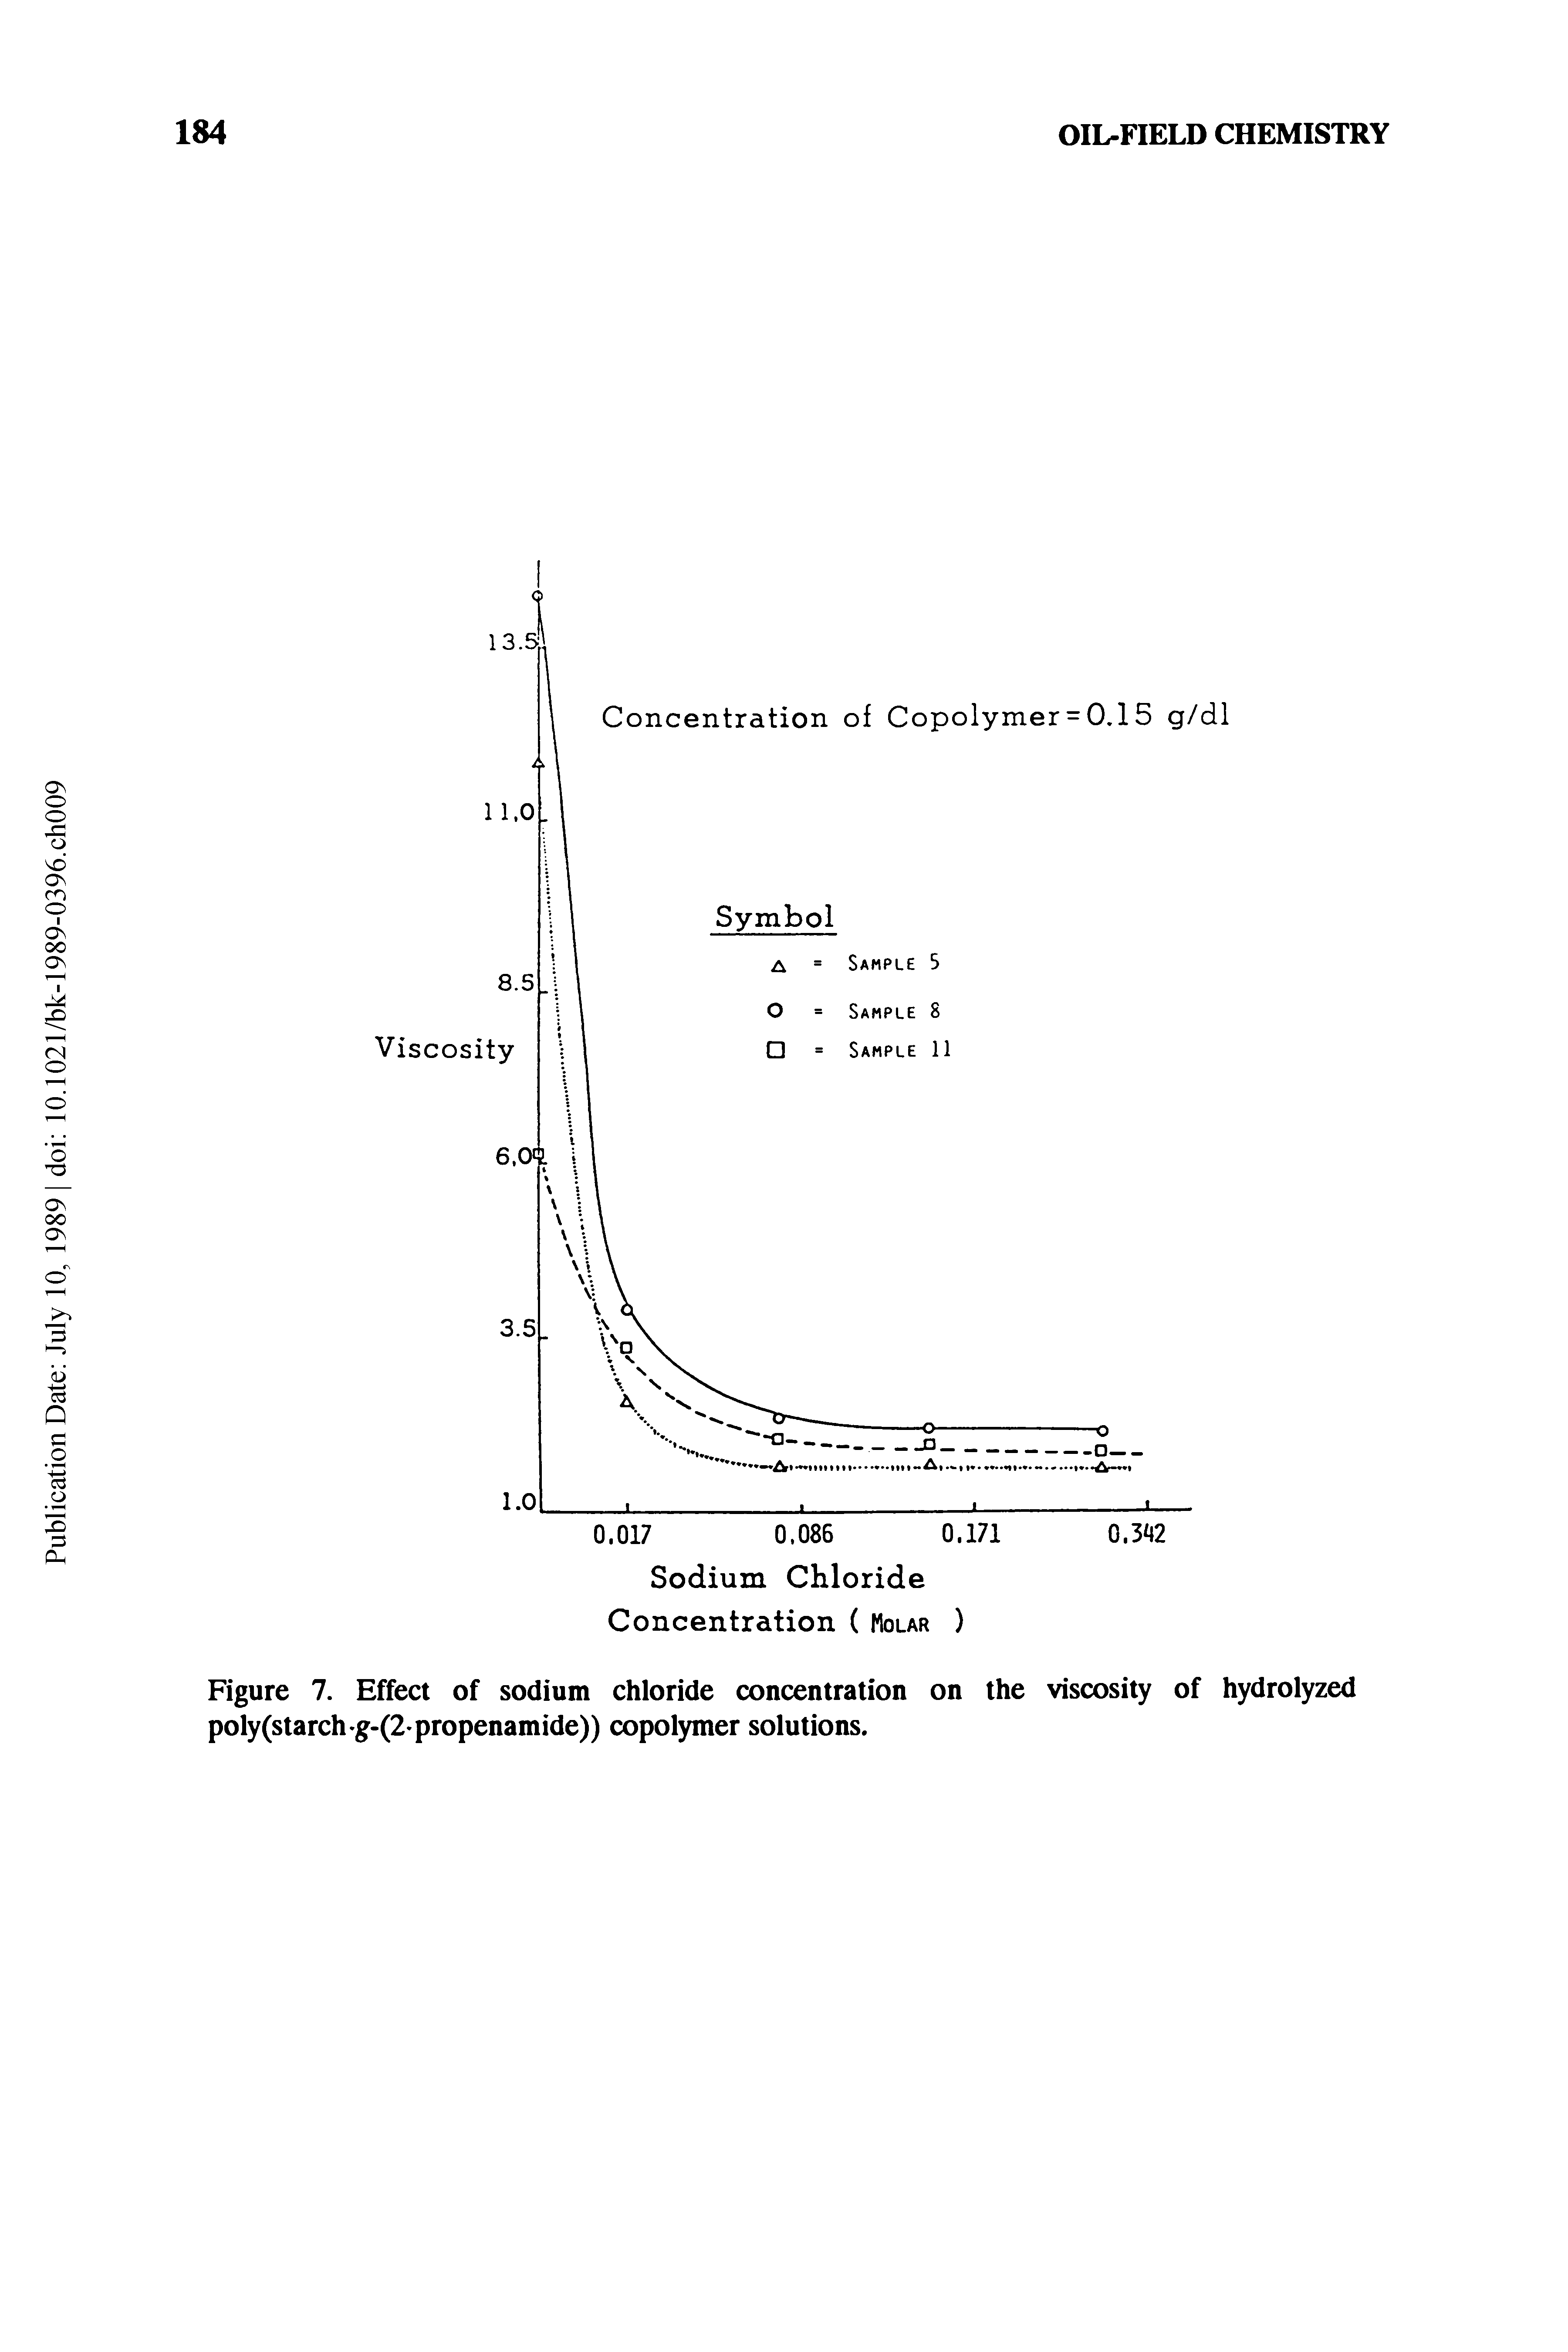 Figure 7. Effect of sodium chloride concentration on the viscosity of hydrolyzed poly(starch g-(2 propenamide)) copolymer solutions.